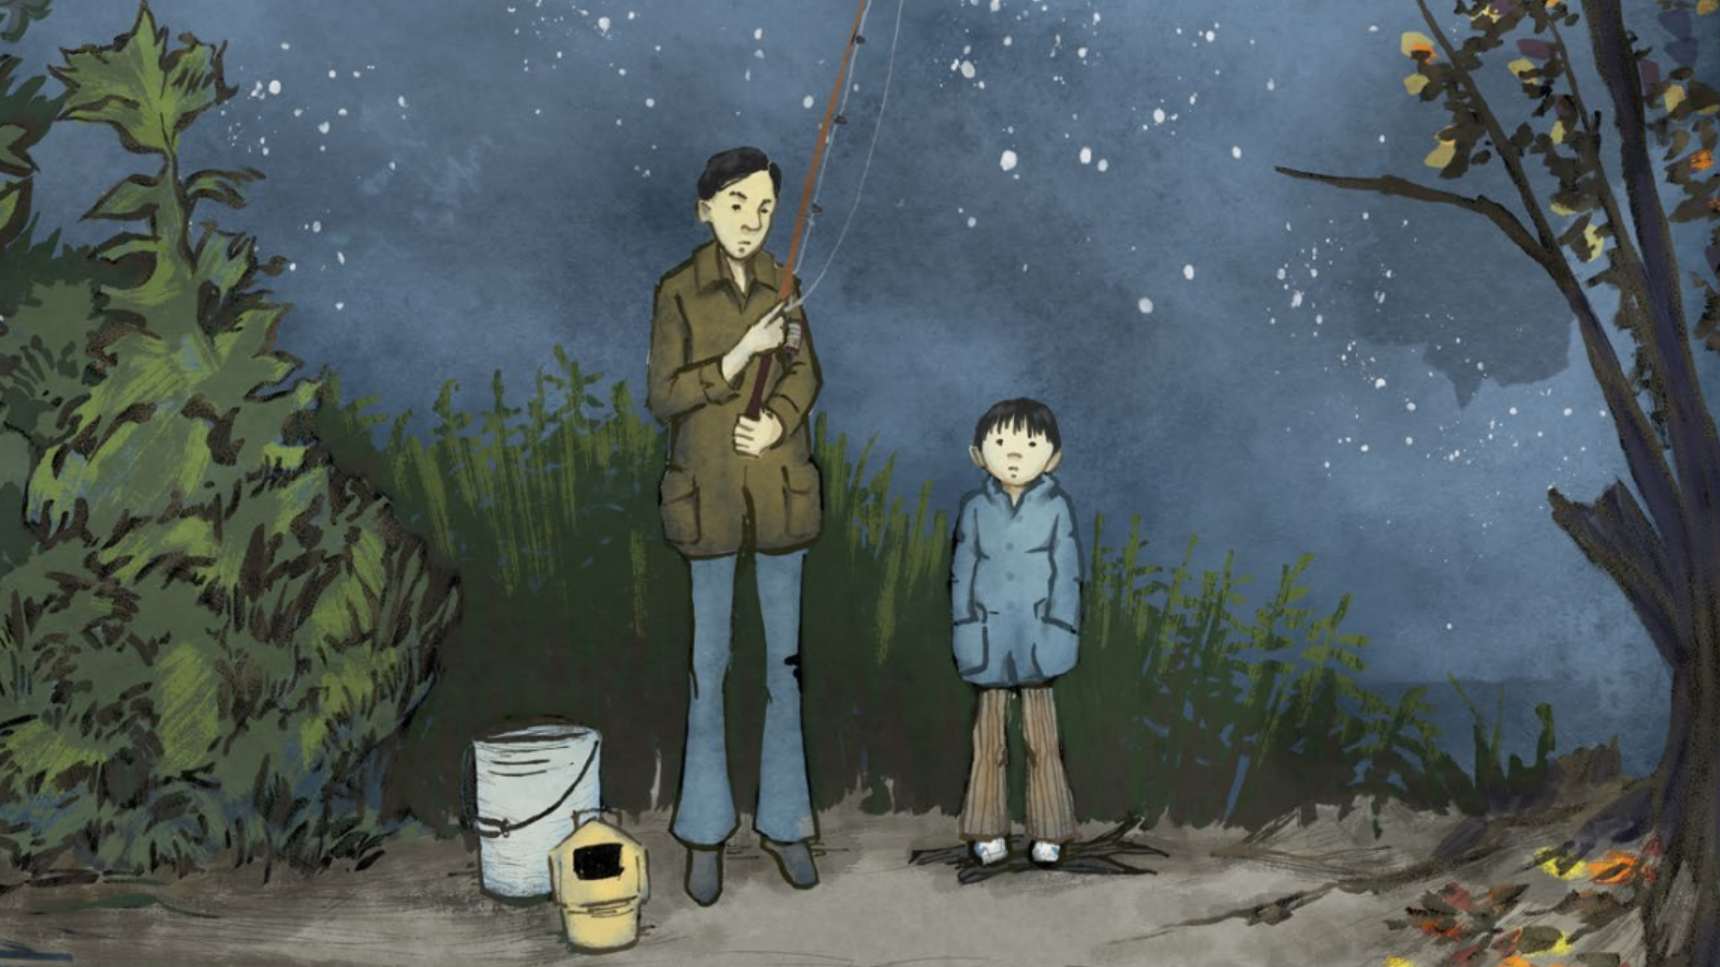 A screen capture of the cover of "A Different Pond" by Bao Phi.